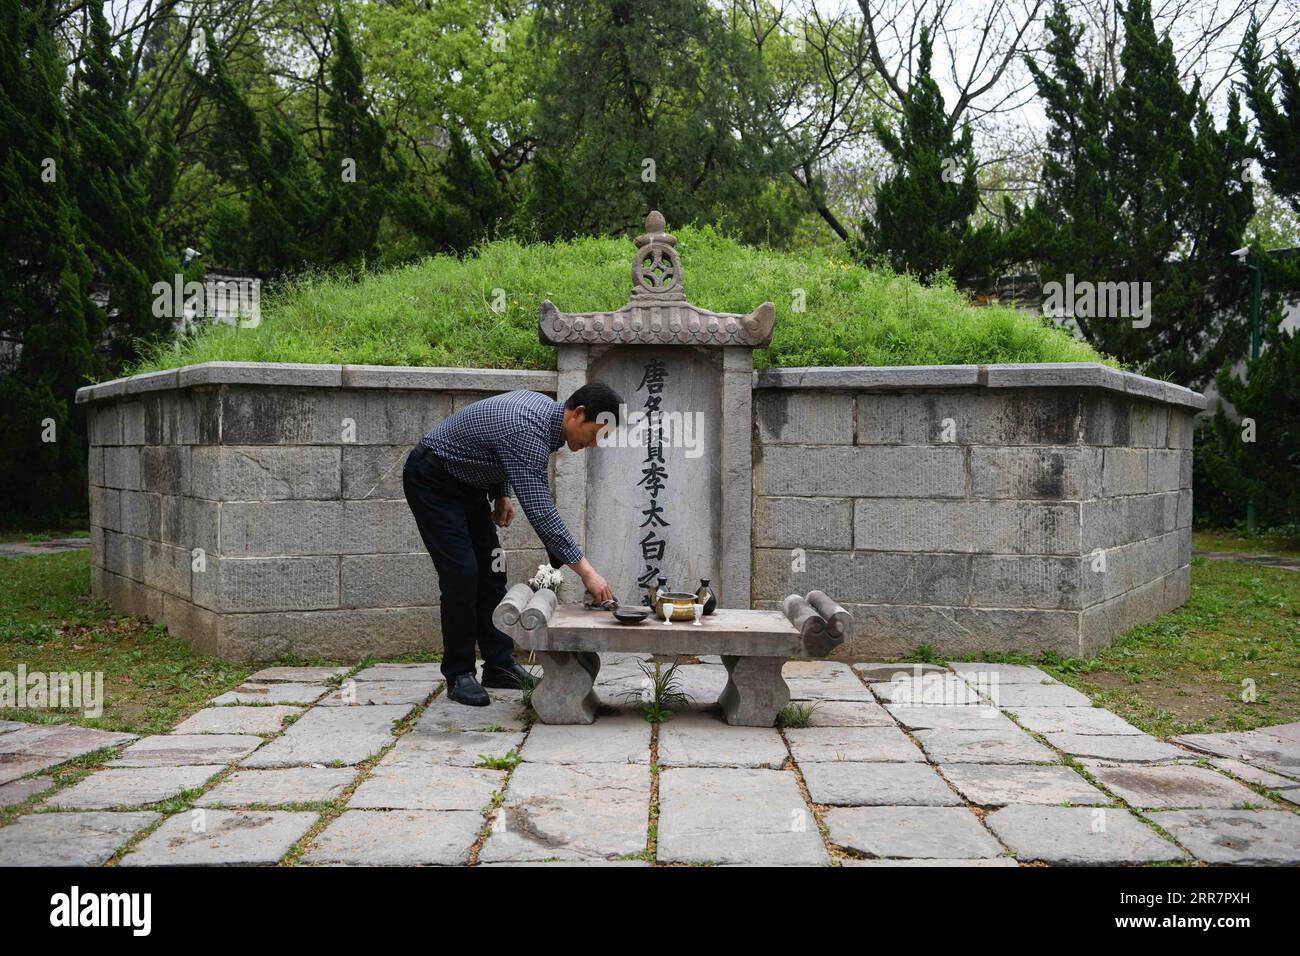 210402 -- DANGTU, April 2, 2021 -- Gu Changxin cleans the altar of Li Bai s tomb at Li Bai cultural park in Dangtu County of Maanshan City, east China s Anhui Province, March 31, 2021. The tomb of Li Bai, a famous poet of Tang Dynasty 618-907, is located at the foot of Qingshan Mountain in Dangtu County of Maanshan City. After Li Bai died in Dangtu, his good friend Gu Lanxin offered his land as Li Bai s burial place. Since then, the Gu s family has become the guardian of Li Bai s tomb, which continues to this day. In 1985, 18-year-old Gu Changxin became the 49th generation tomb keeper. For mor Stock Photo